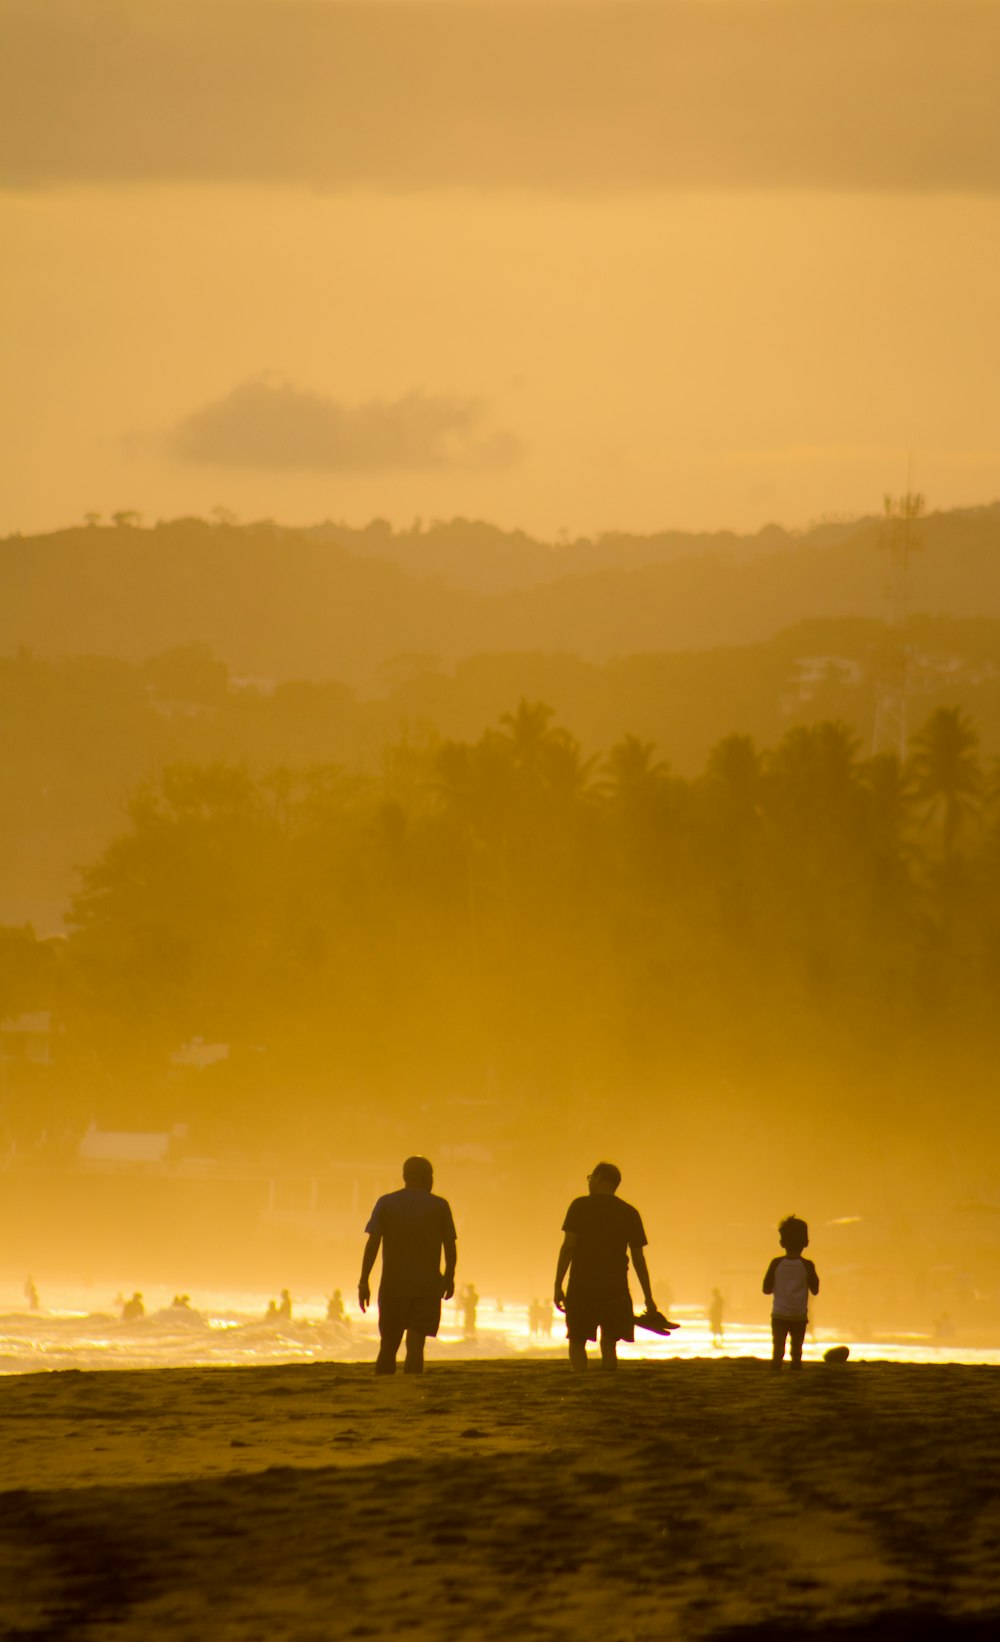 silhouette of people standing on field during daytime